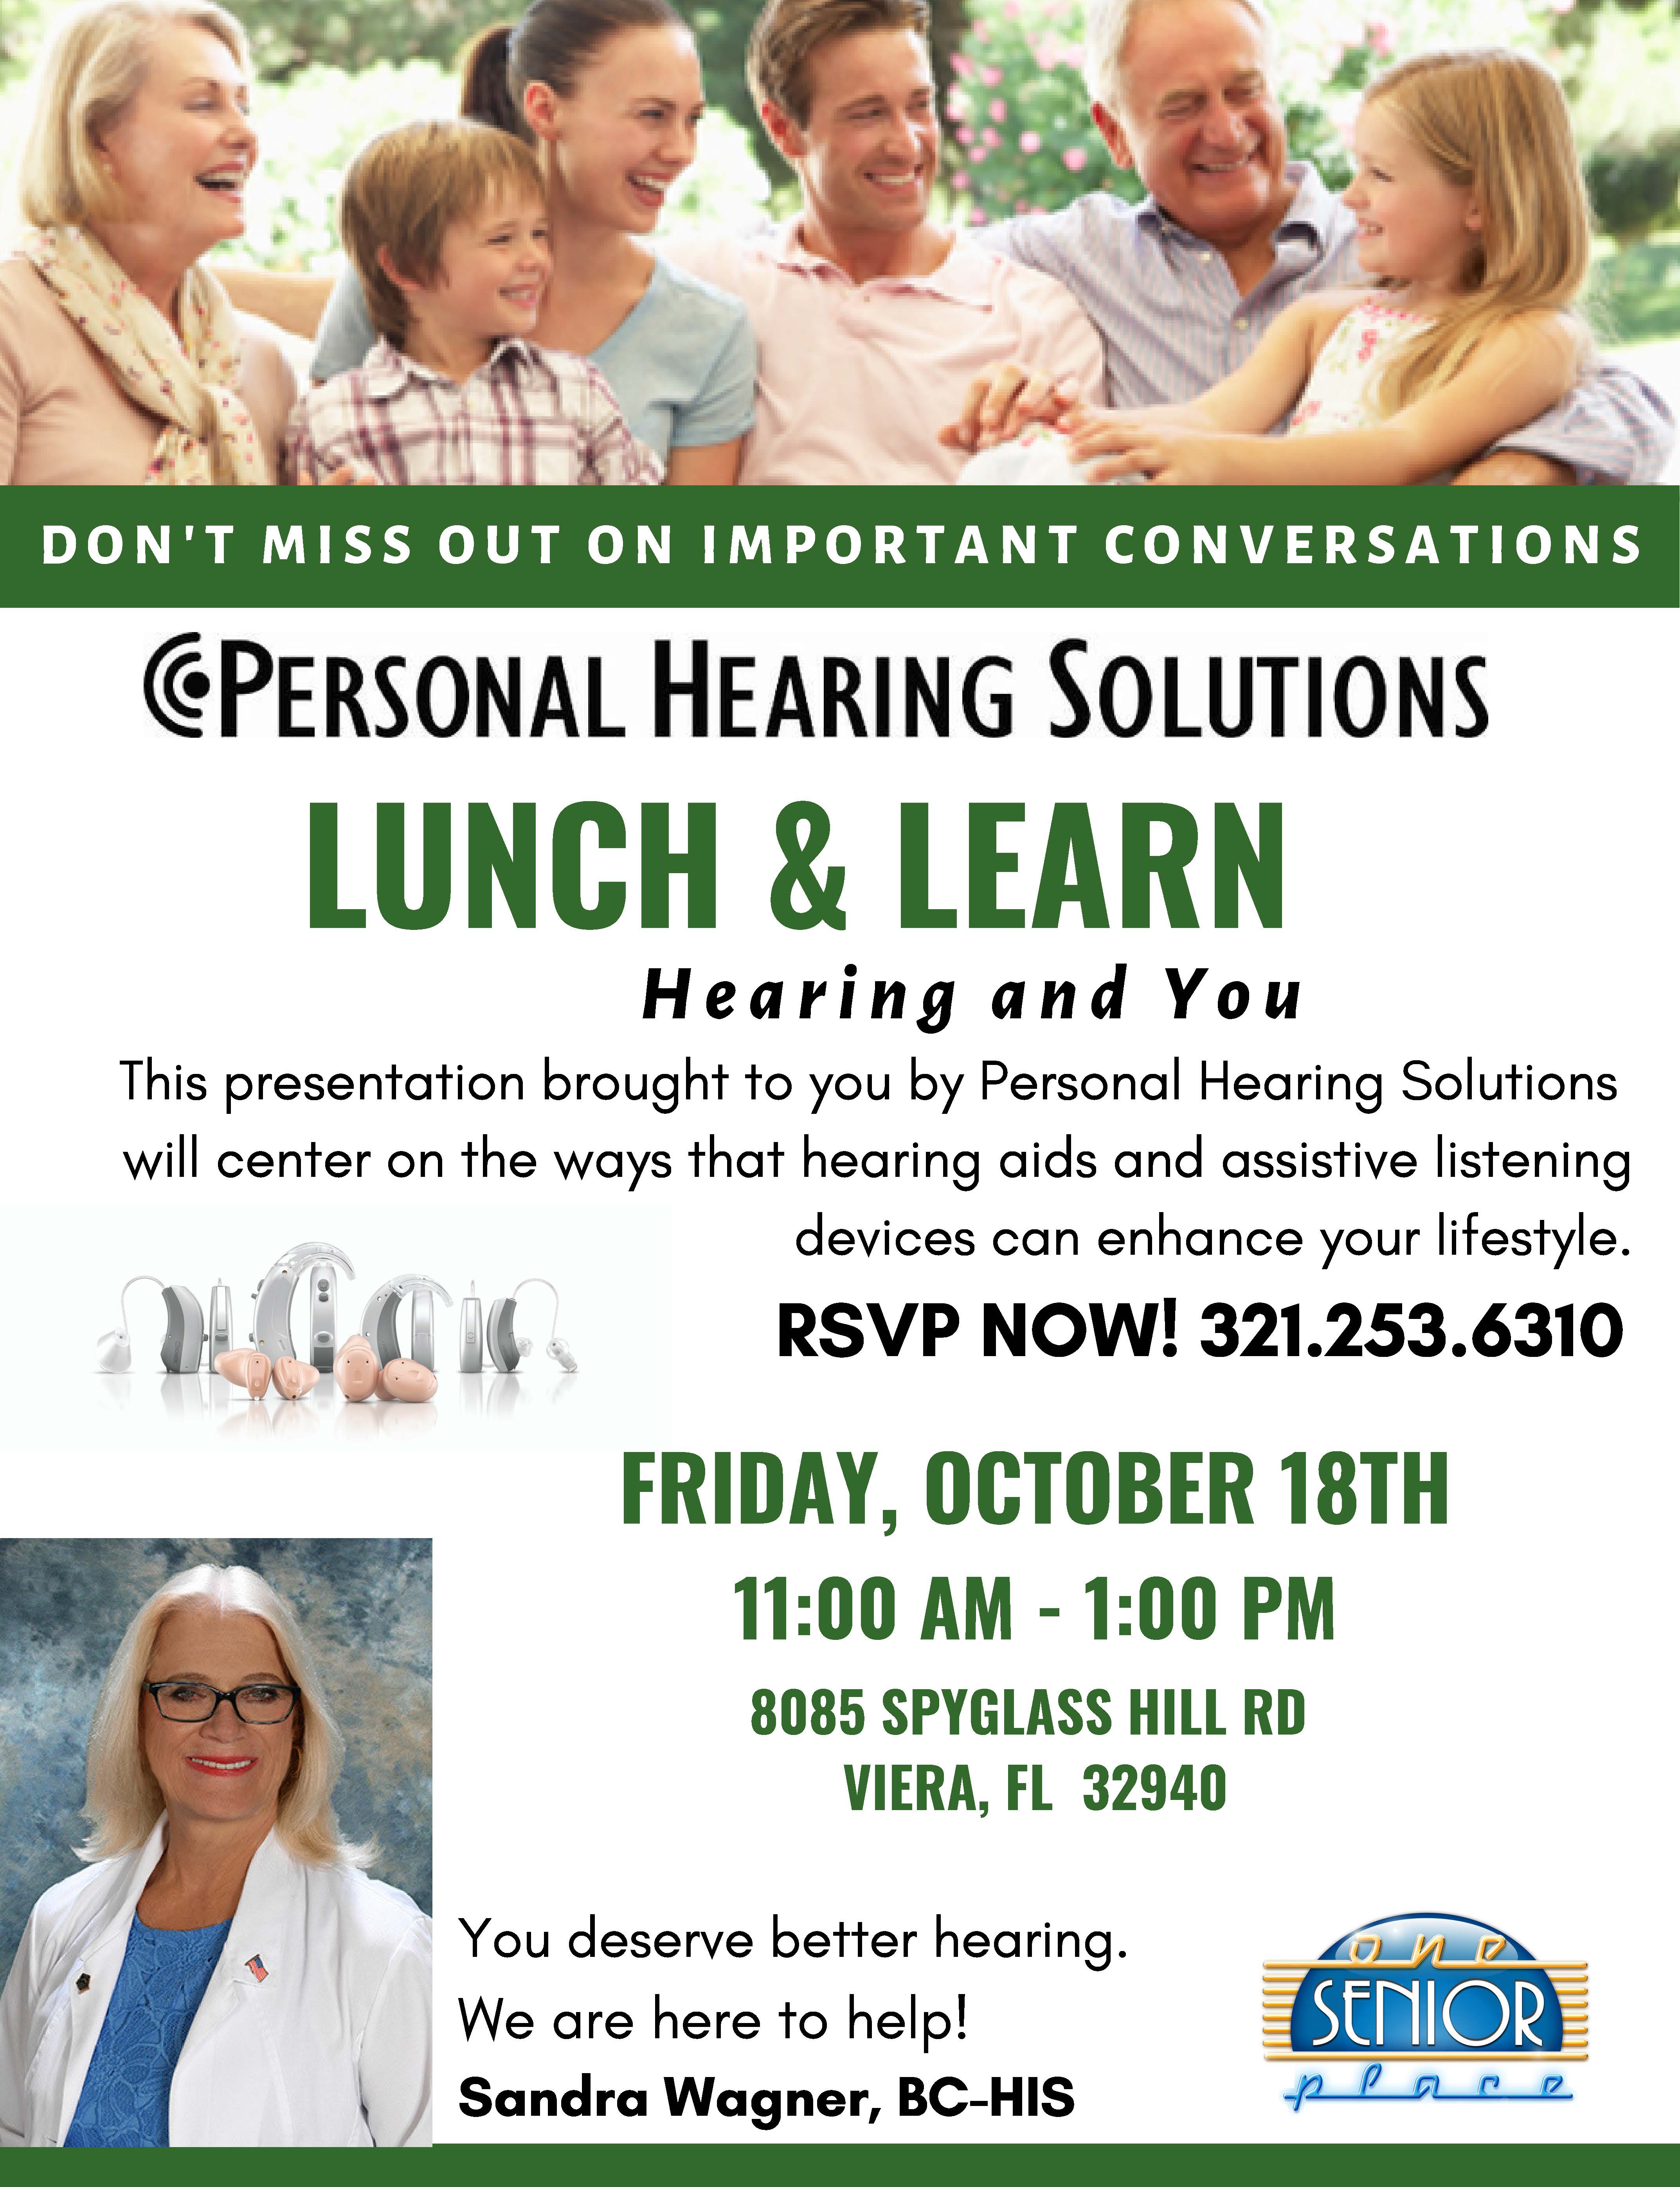 Hearing and You, Lunch and Learn Seminar presented by Personal Hearing Solutions